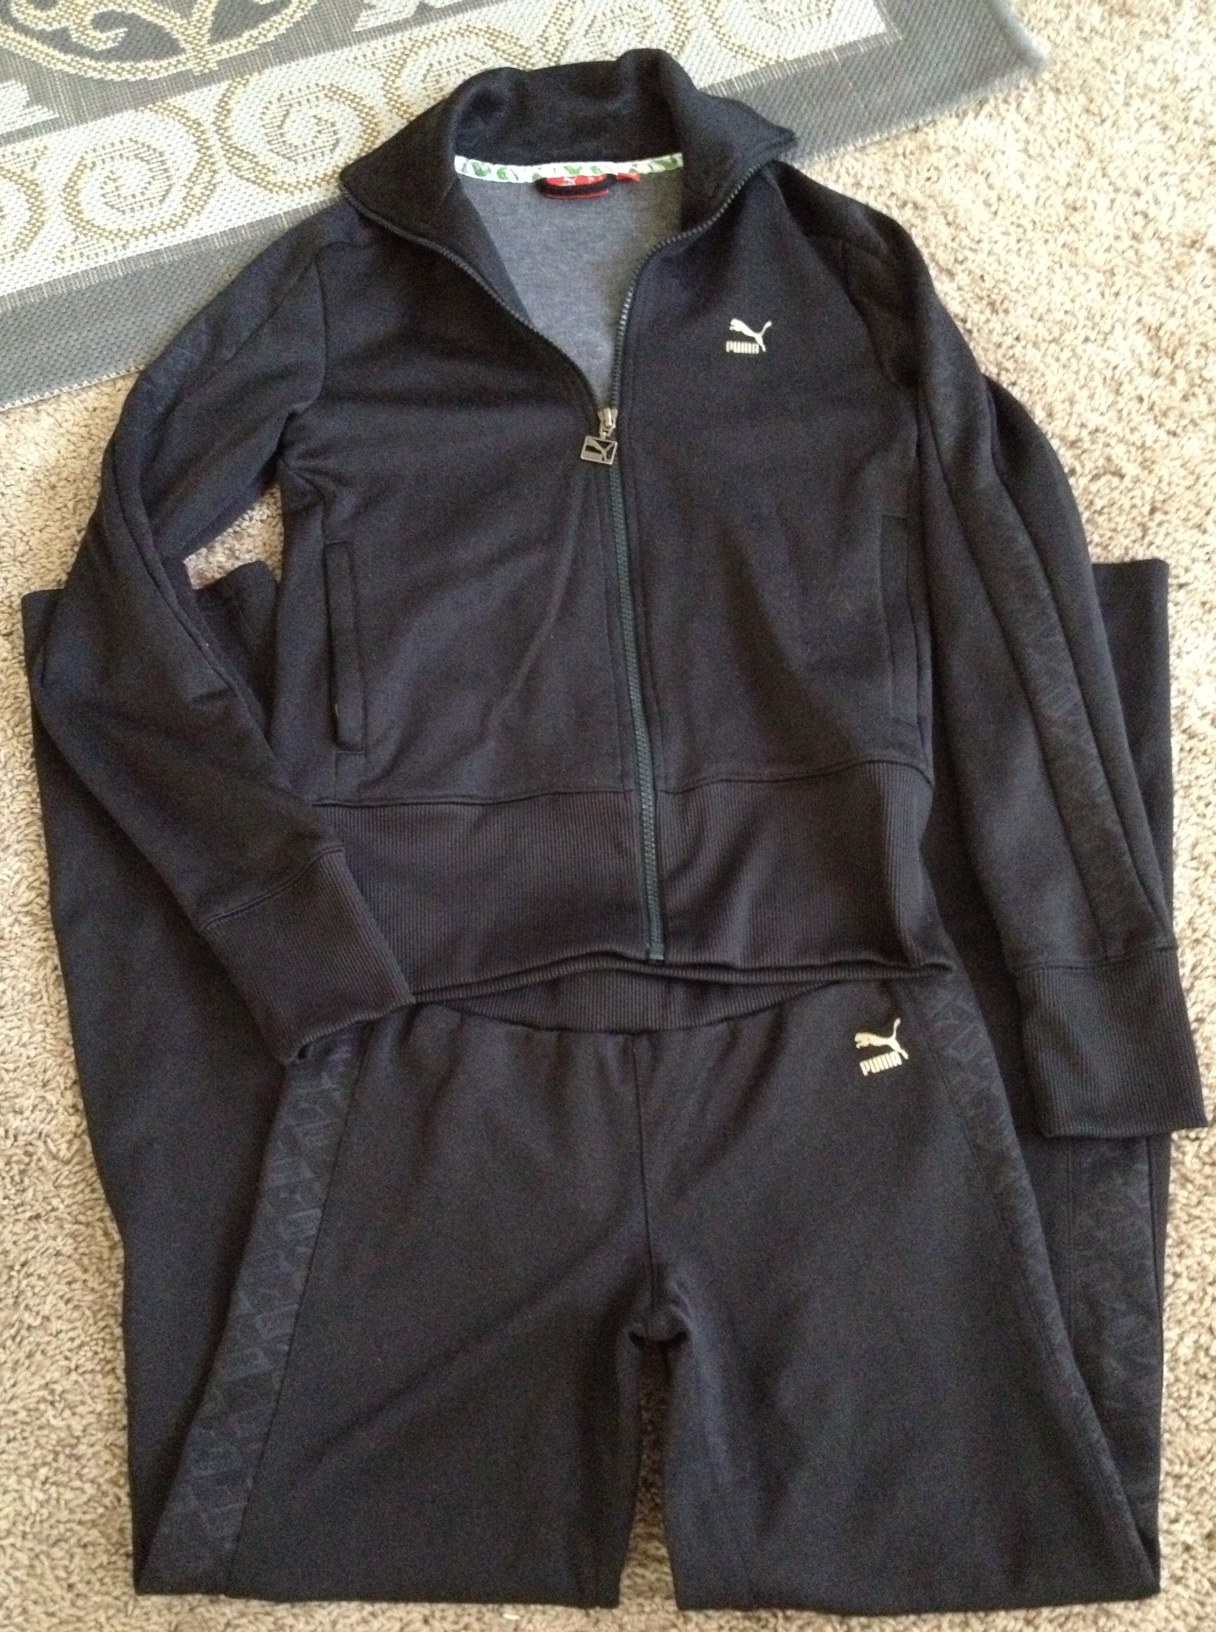 A brand new womens' Puma track suit! $2!!!